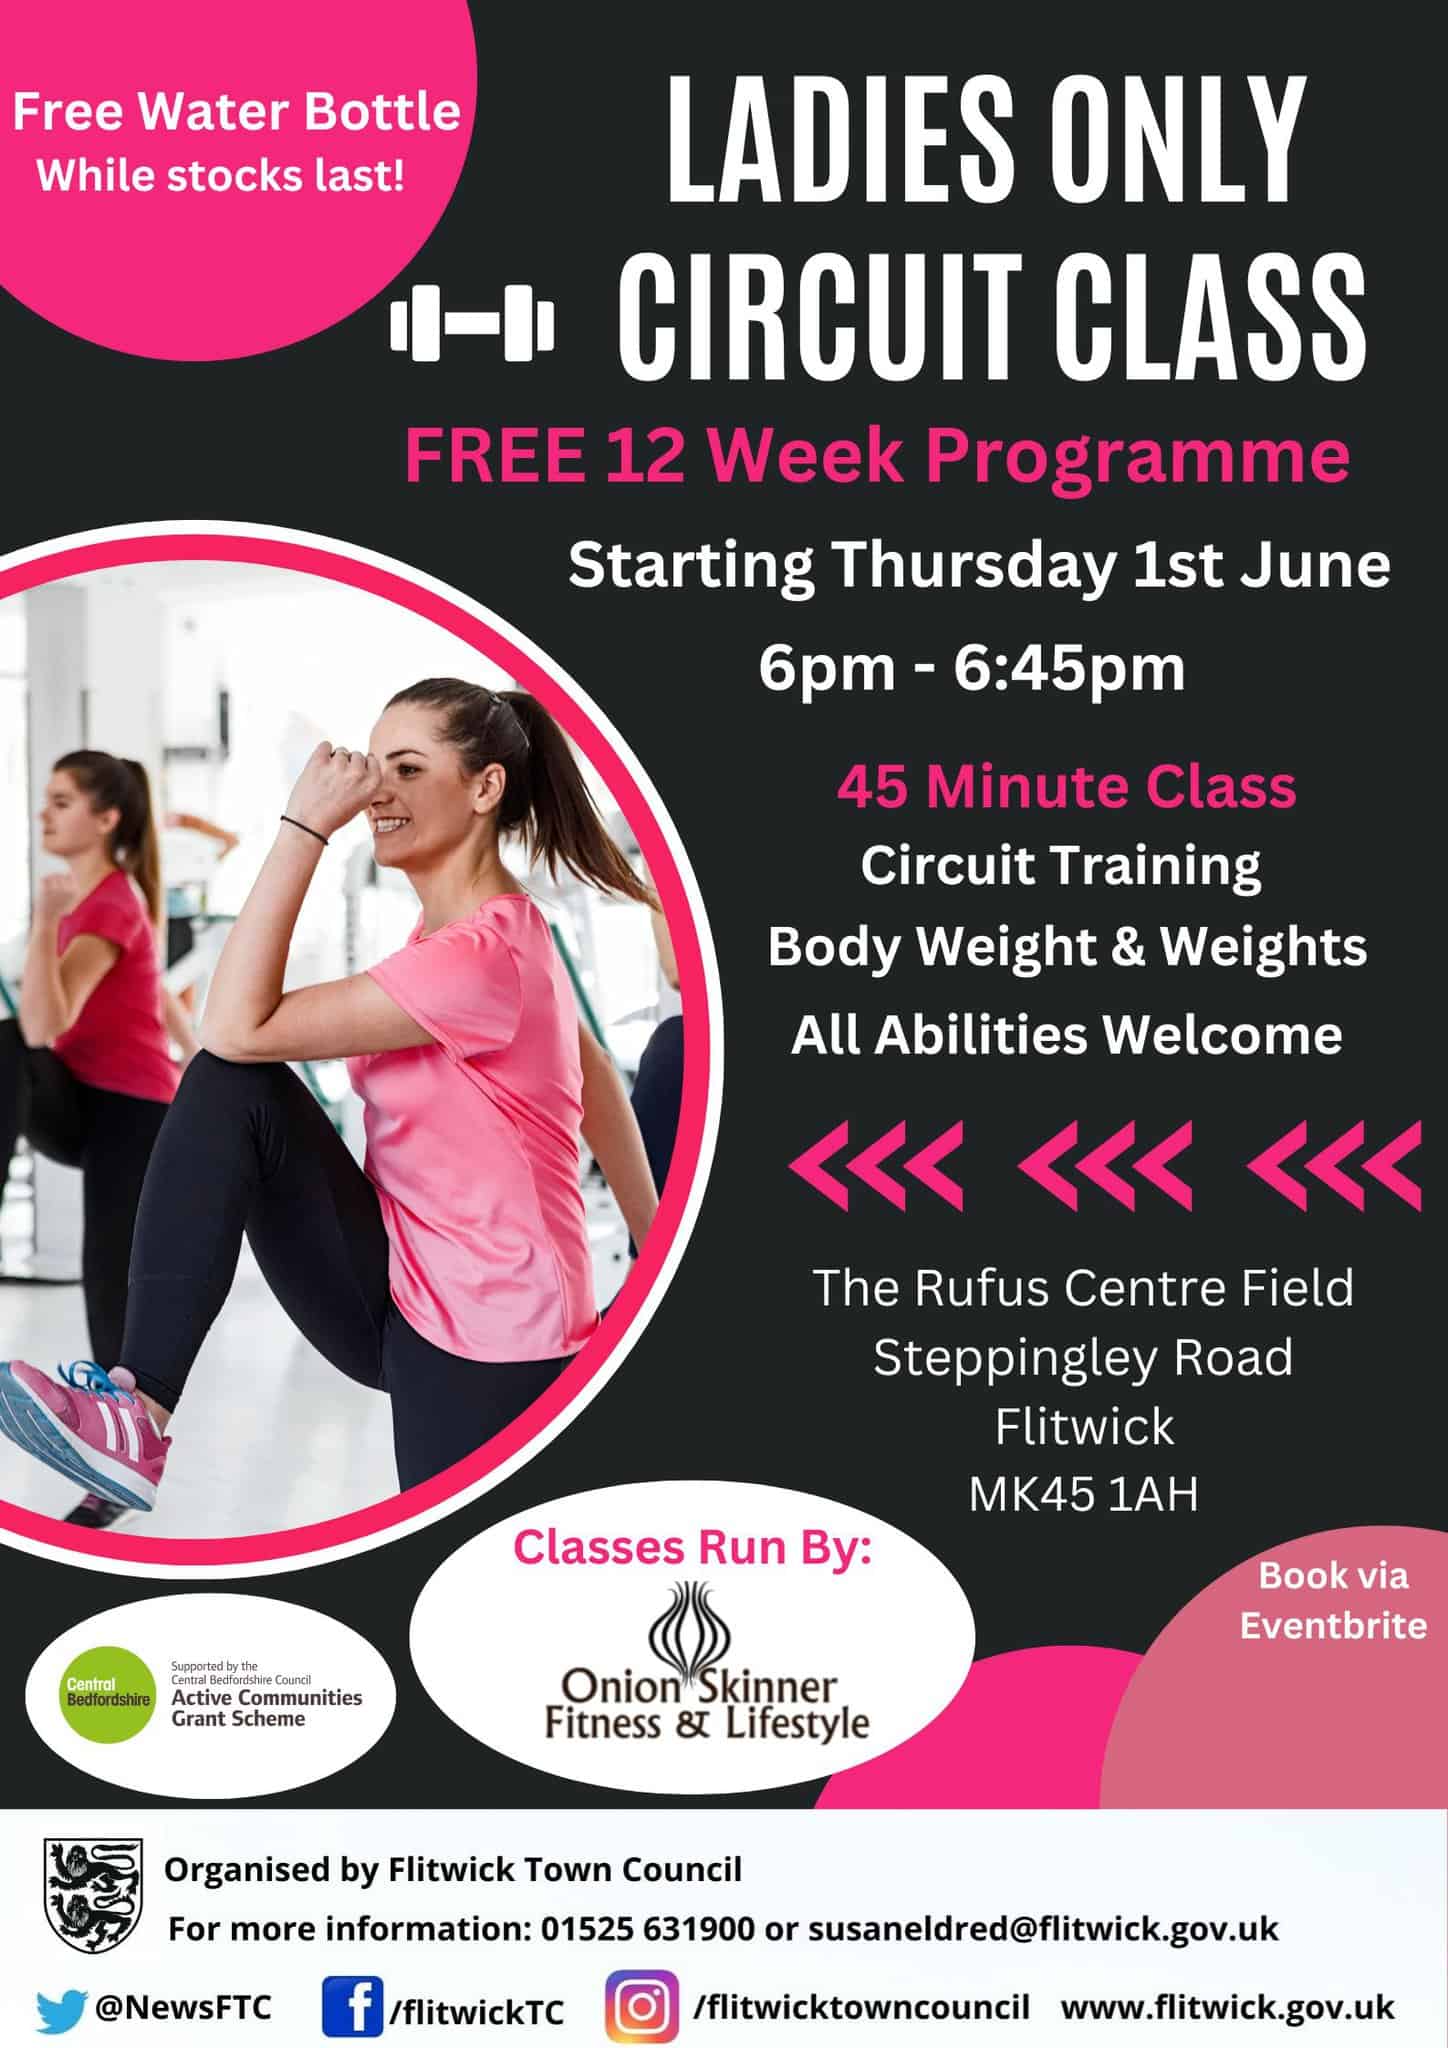 POSTER ADVERTISING FITNESS CLASS